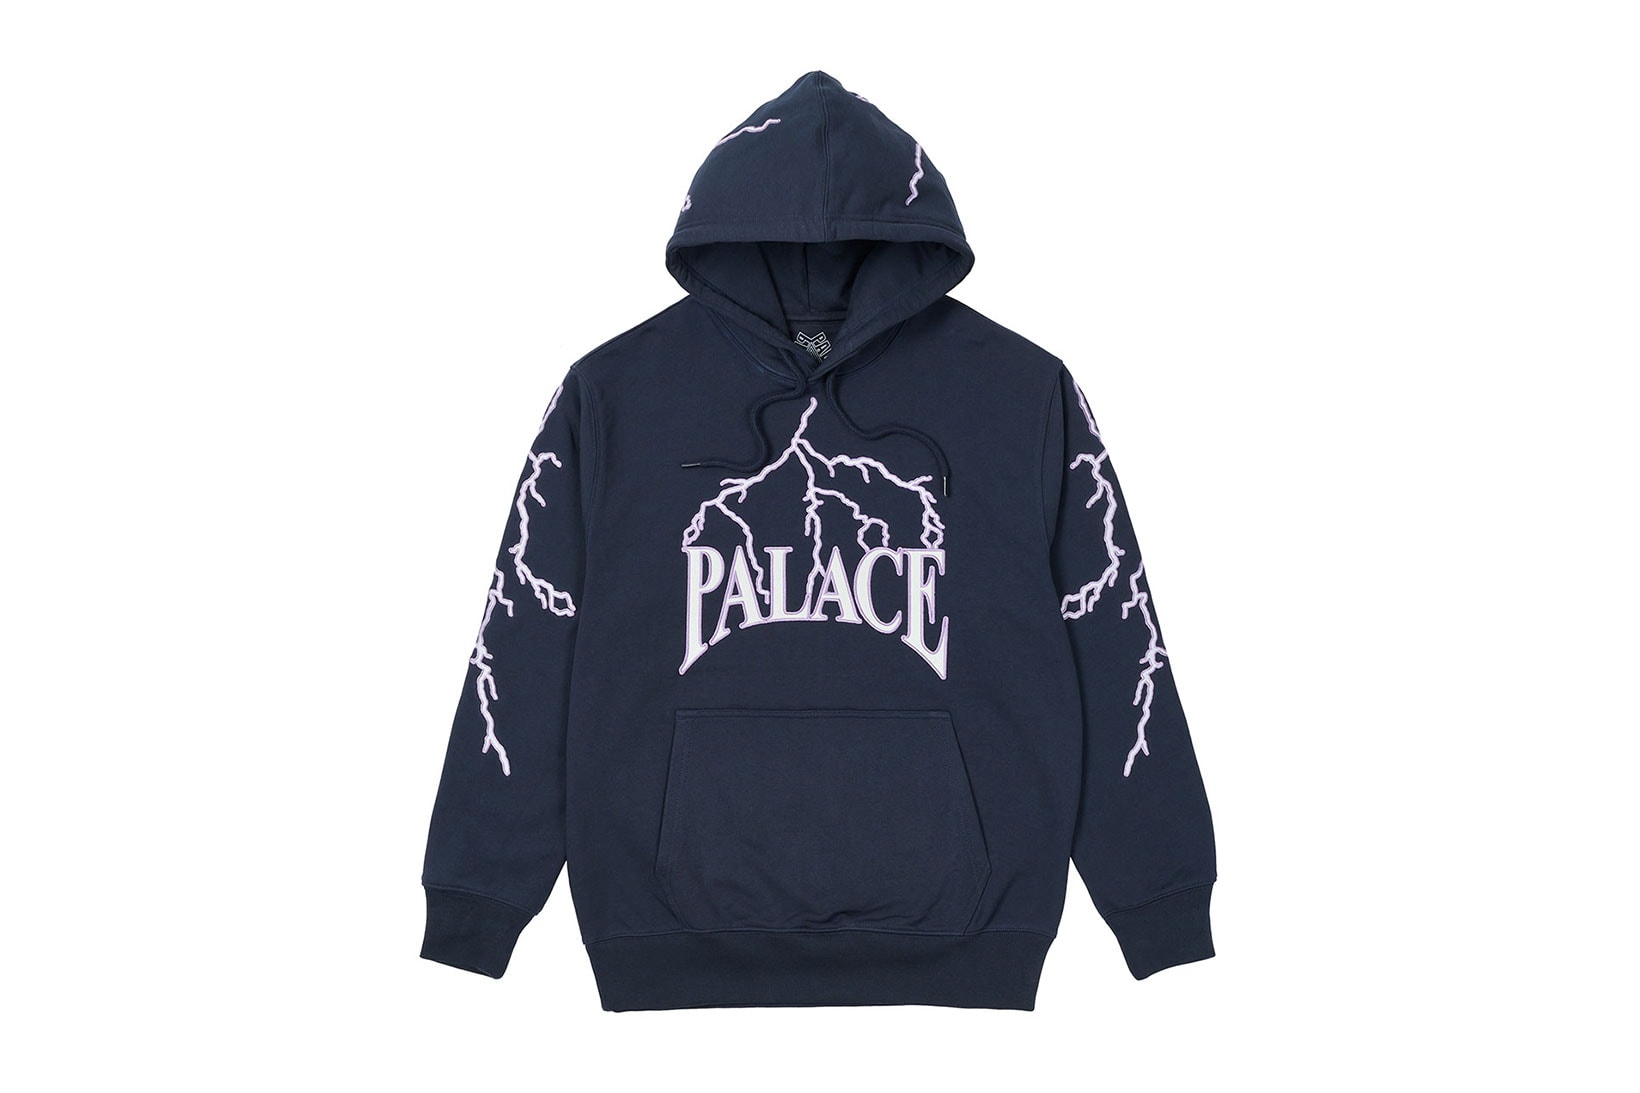 palace spring drop 4 collection hoodie lightning navy